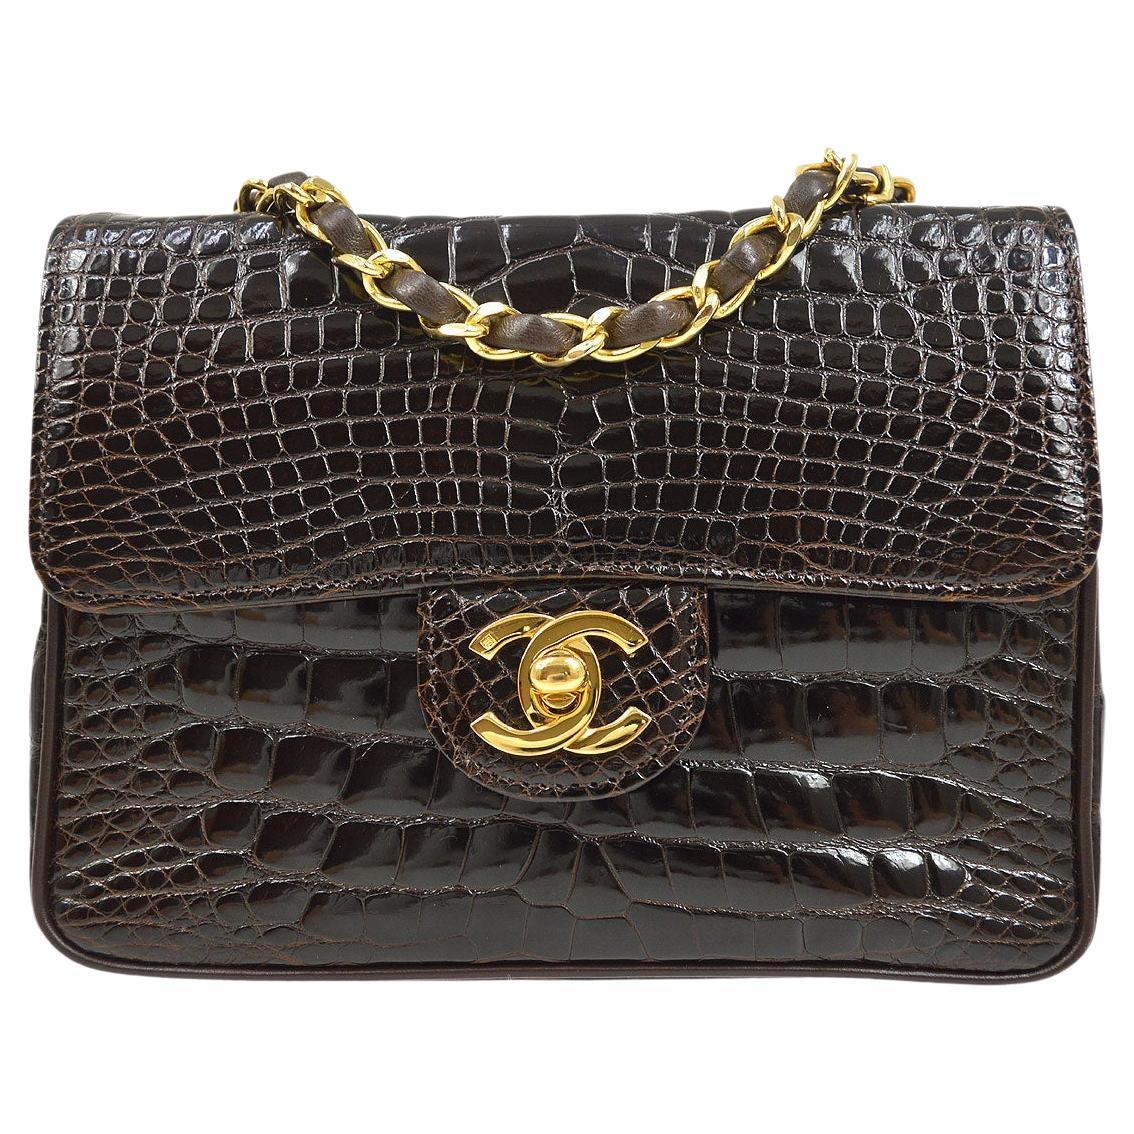 CHANEL Small Brown Chocolate Crocodile Exotic Gold Evening Shoulder Flap Bag